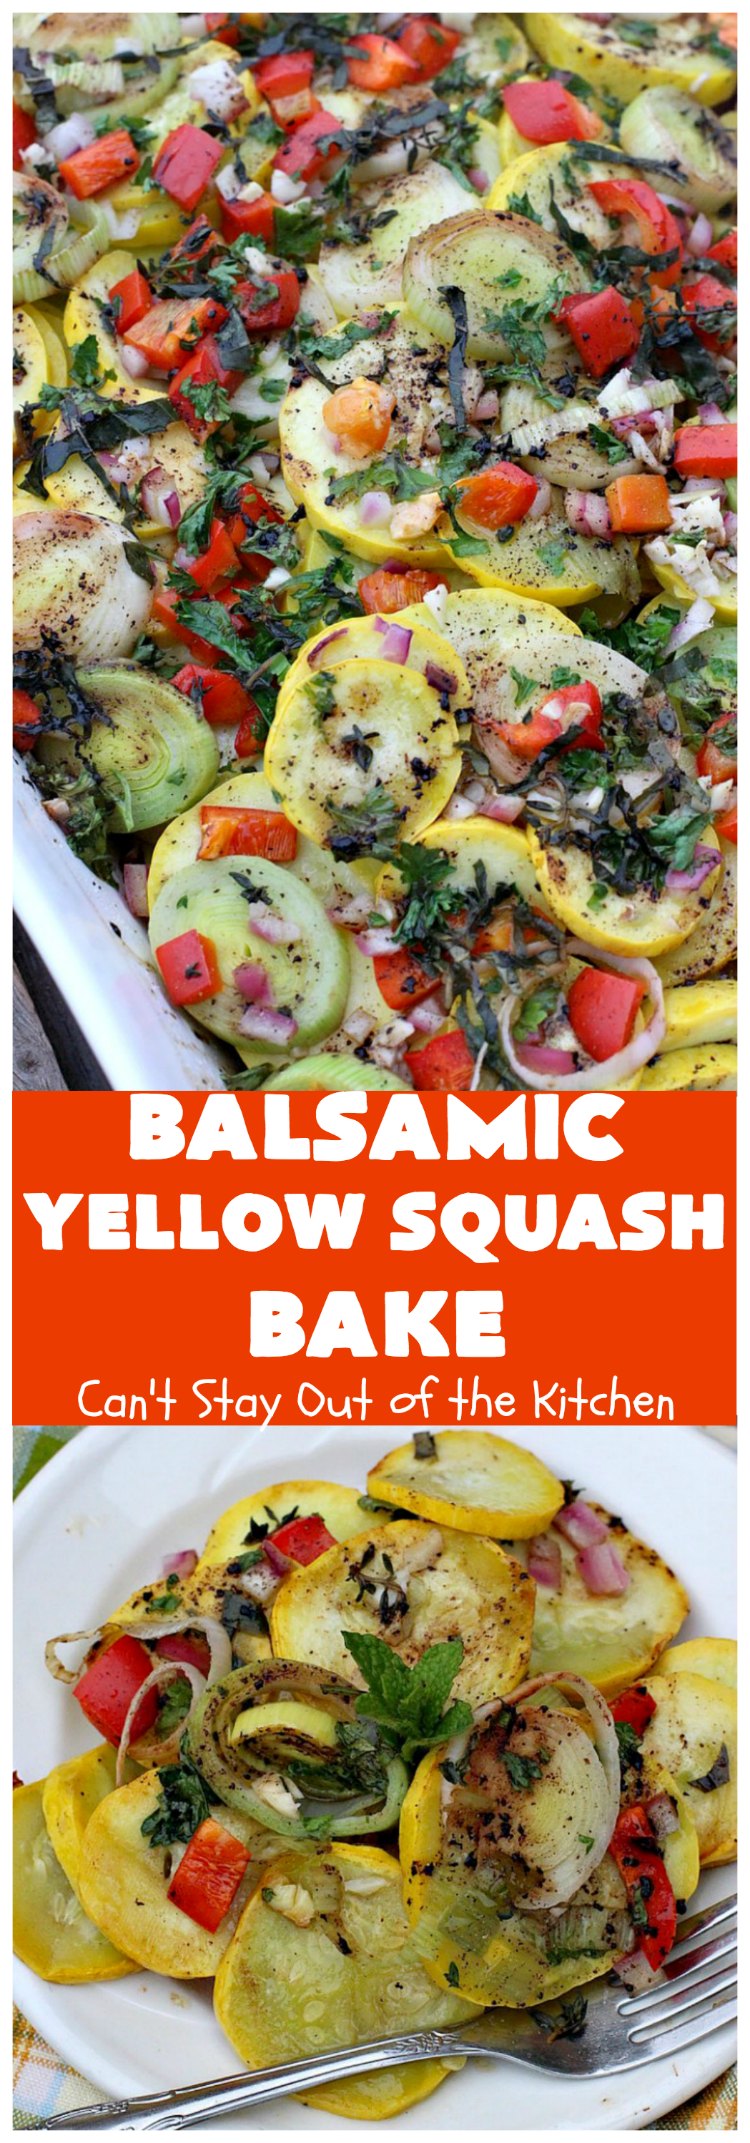 Balsamic Yellow Squash Bake | Can't Stay Out of the Kitchen